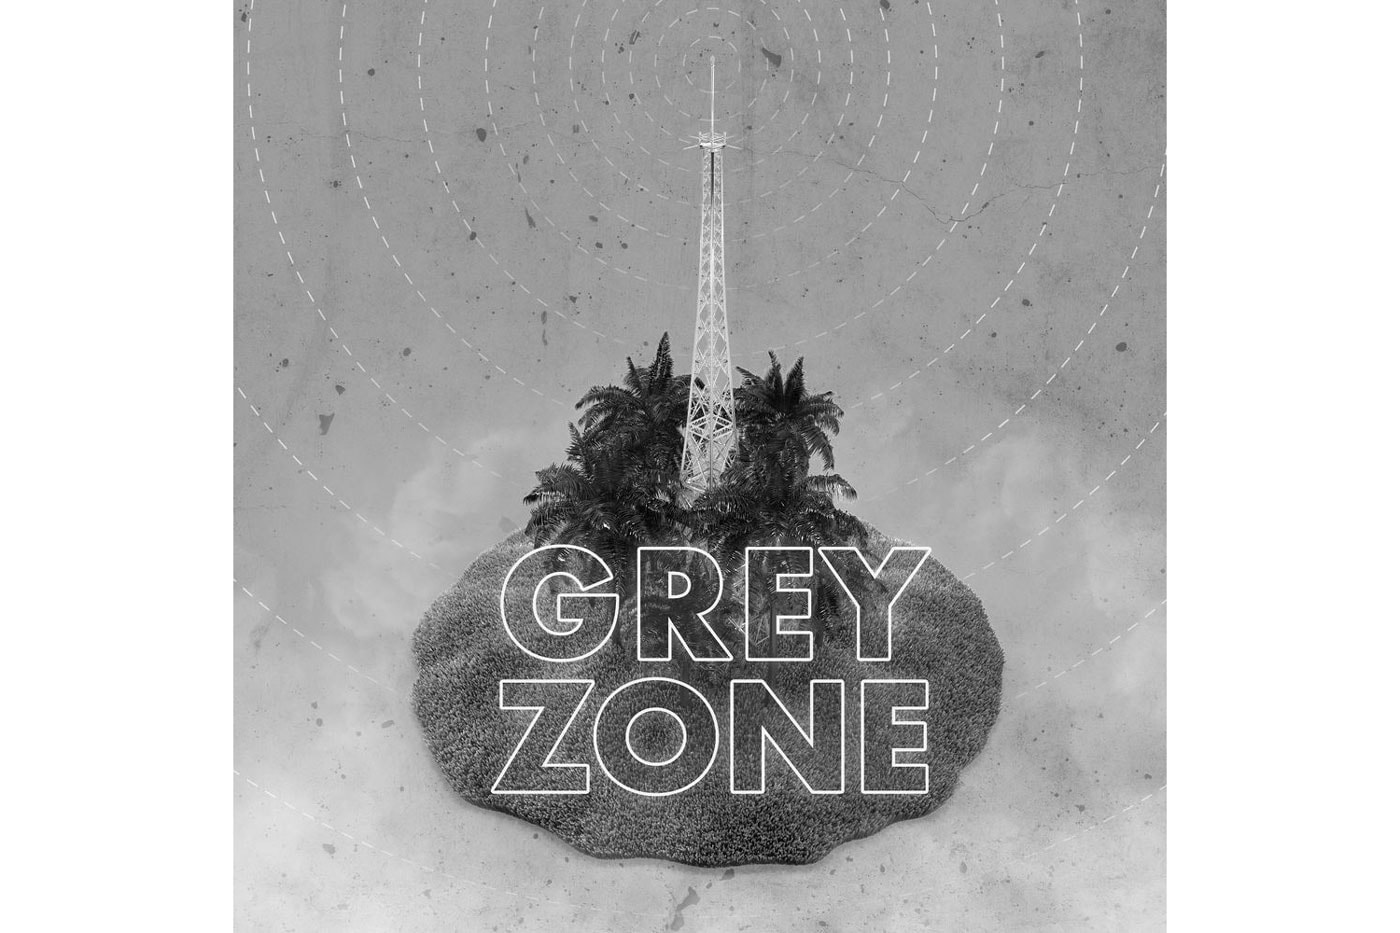 Brenmar Continues To Break Boundaries With 'Grey Zone Vol. 4' Mix